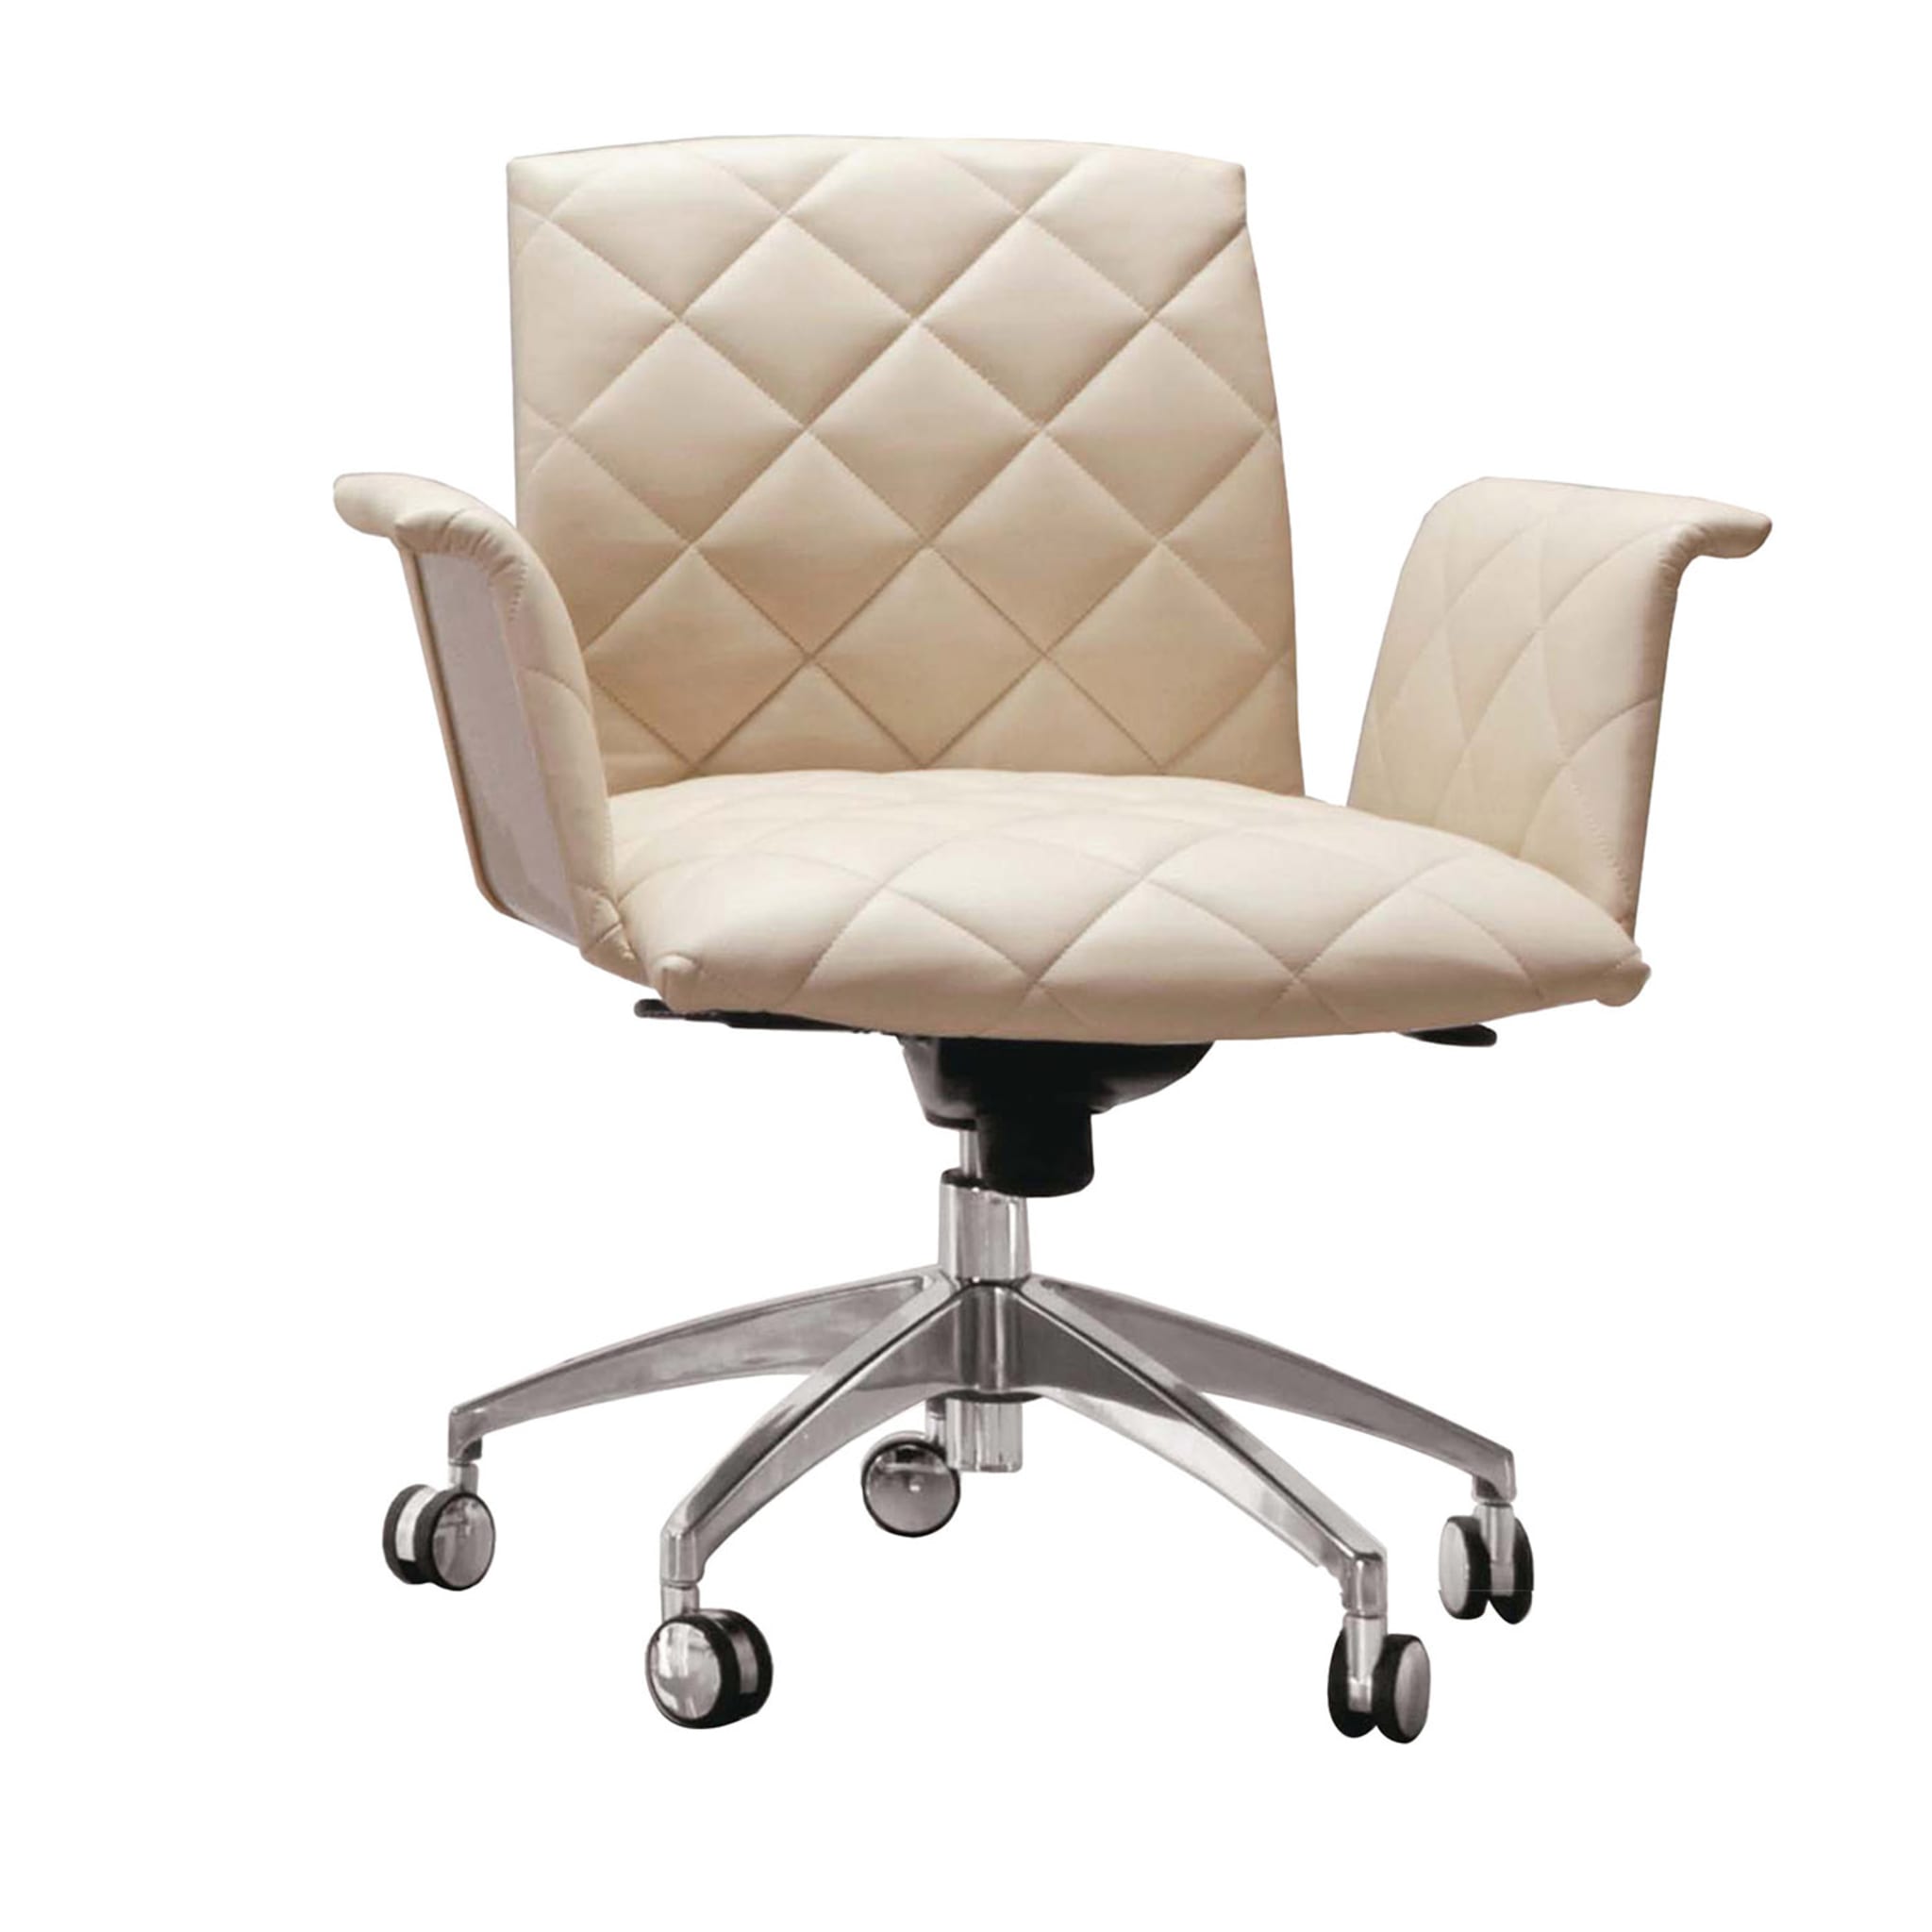 Guest Beige Leather Office Chair - Main view